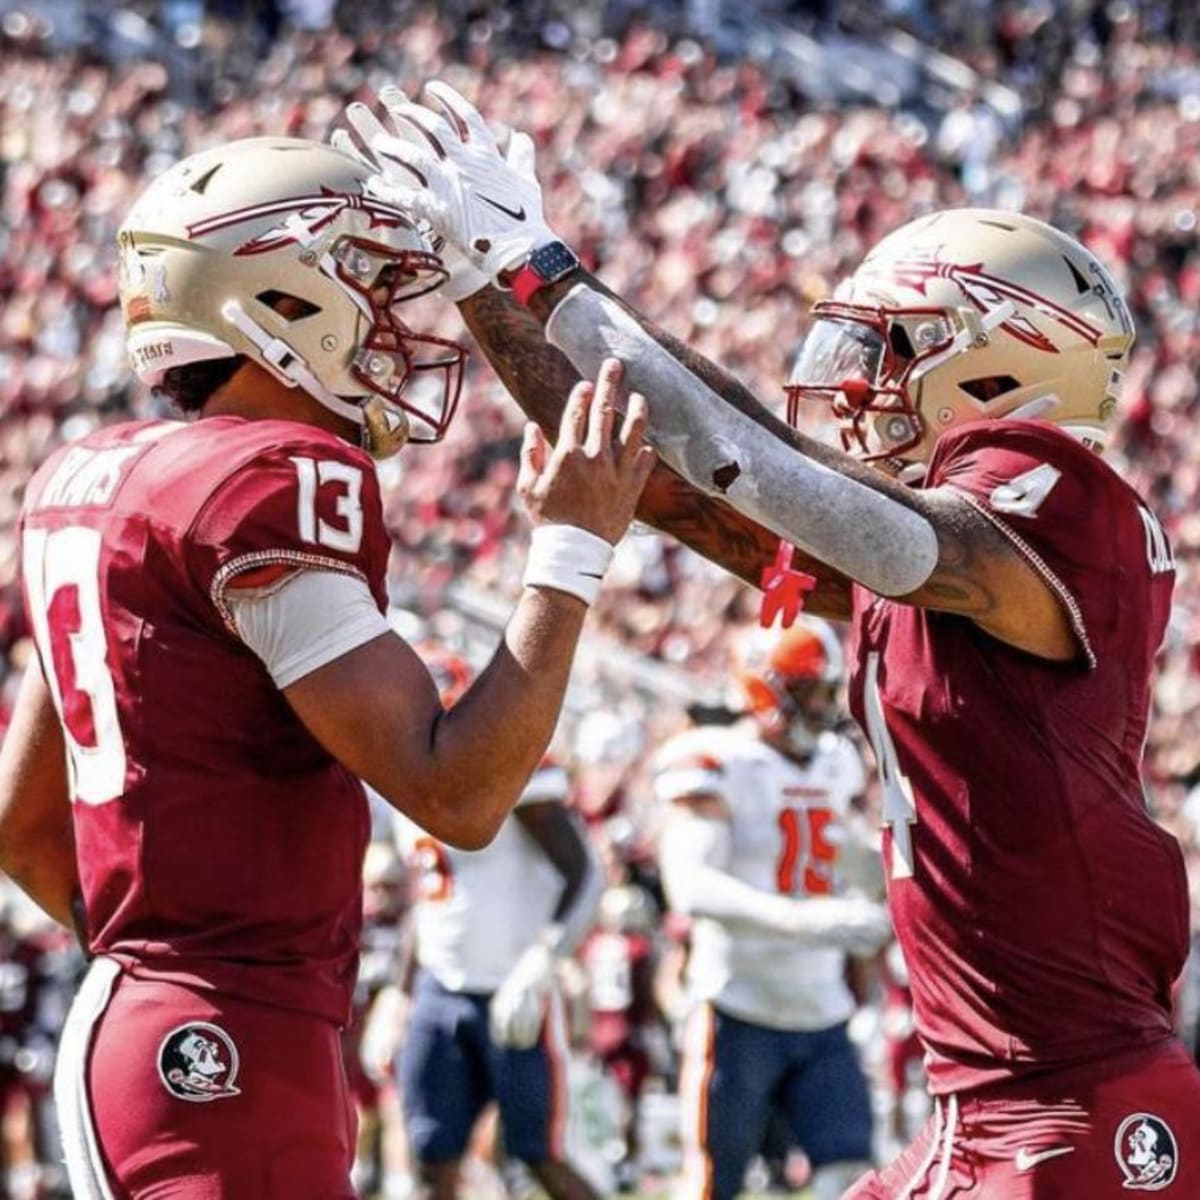 FSU handles business, clinches spot in ACC Championship ahead of